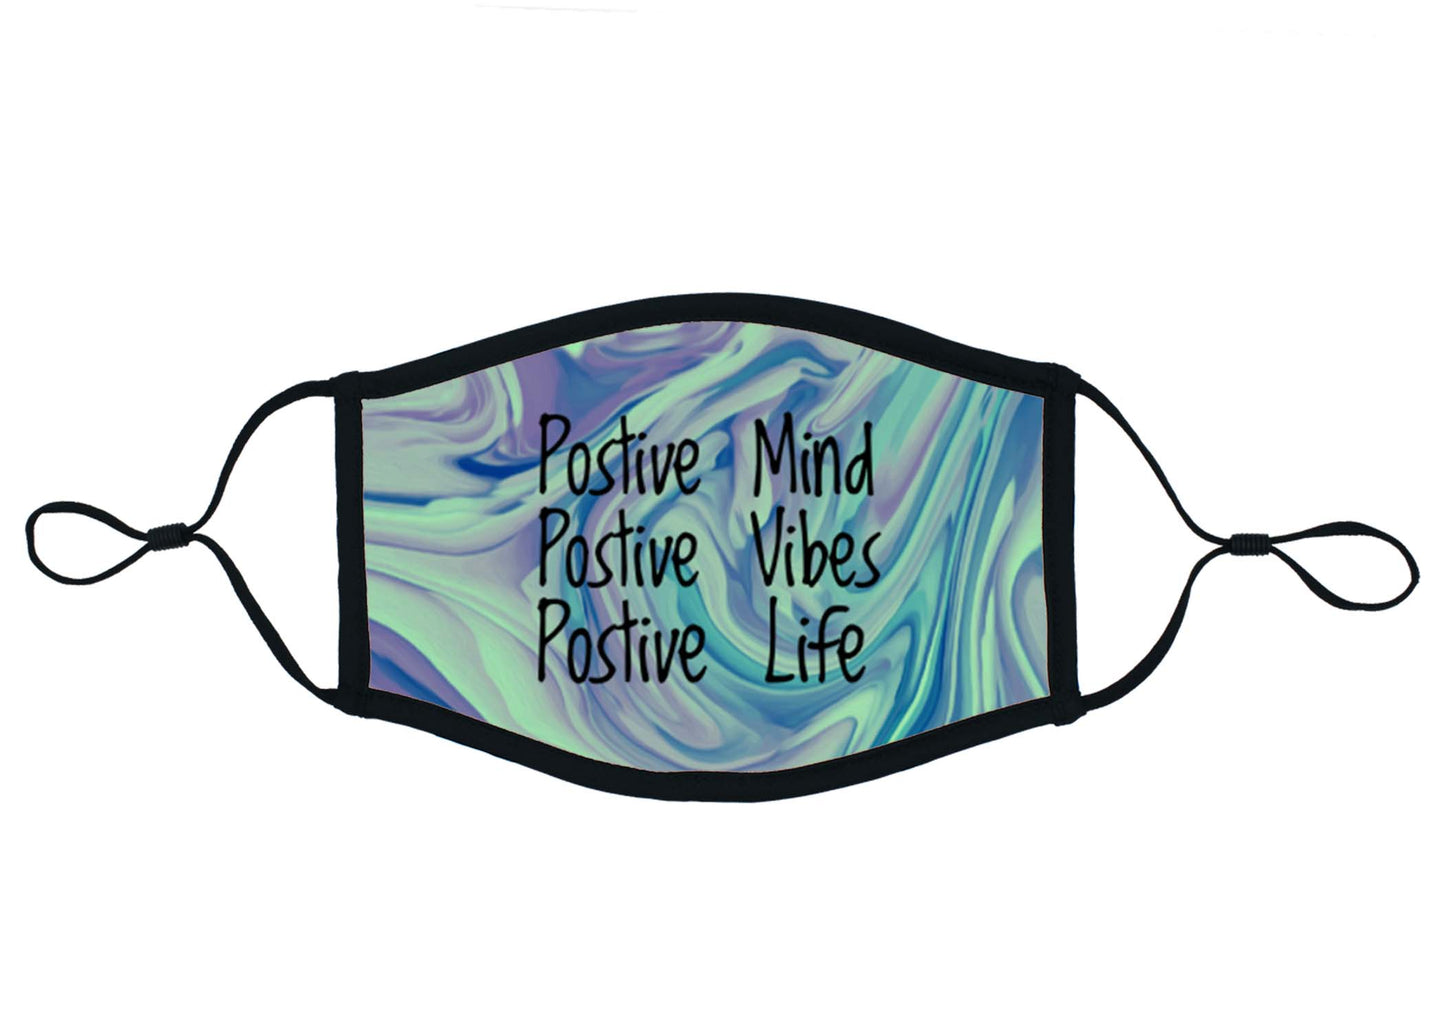 The "POSITIVE" Mind, Vibes, Life   Mask